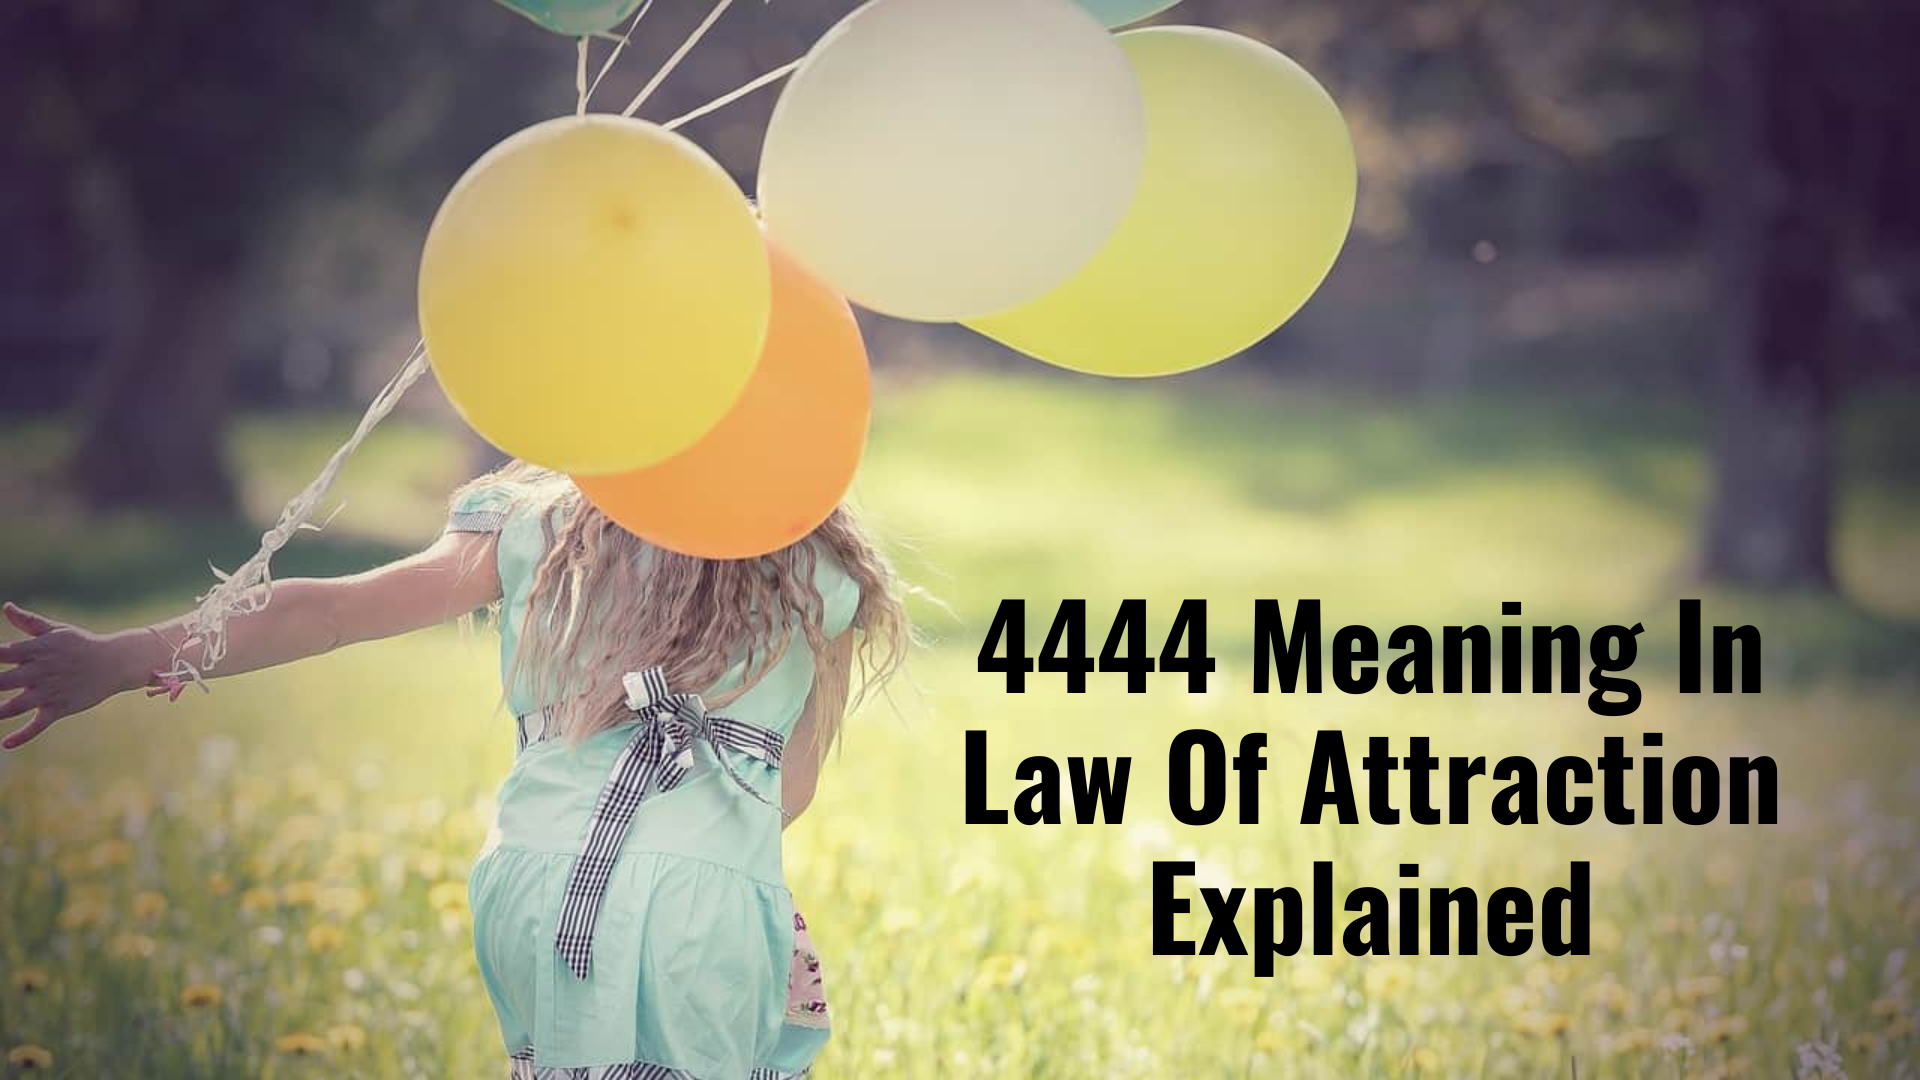 A girl running while holding balloons with words 4444 Meaning In Law Of Attraction Explained